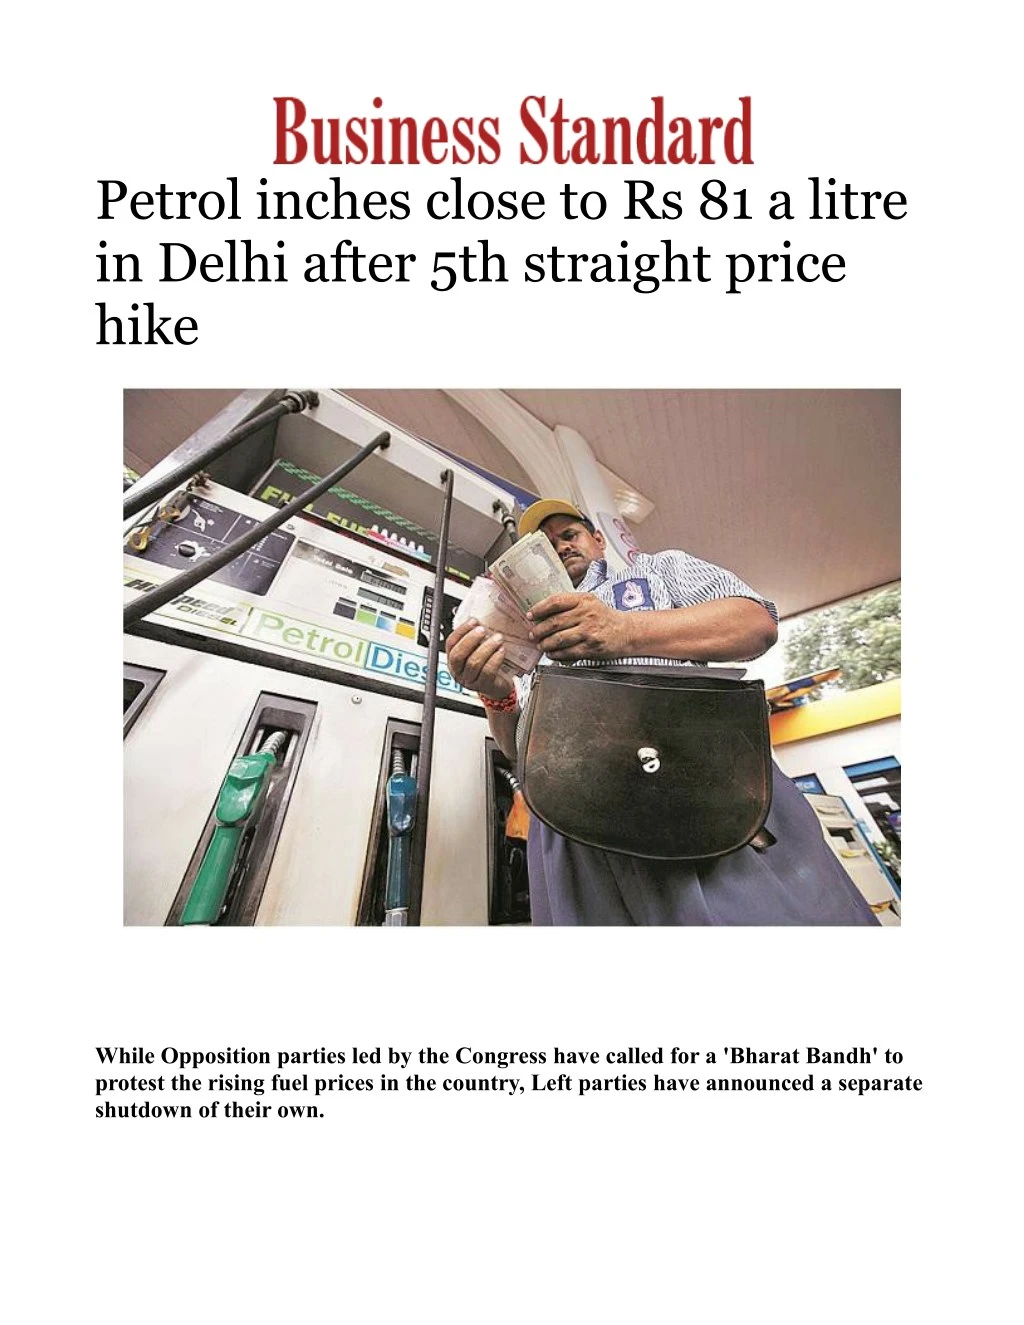 petrol inches close to rs 81 a litre in delhi